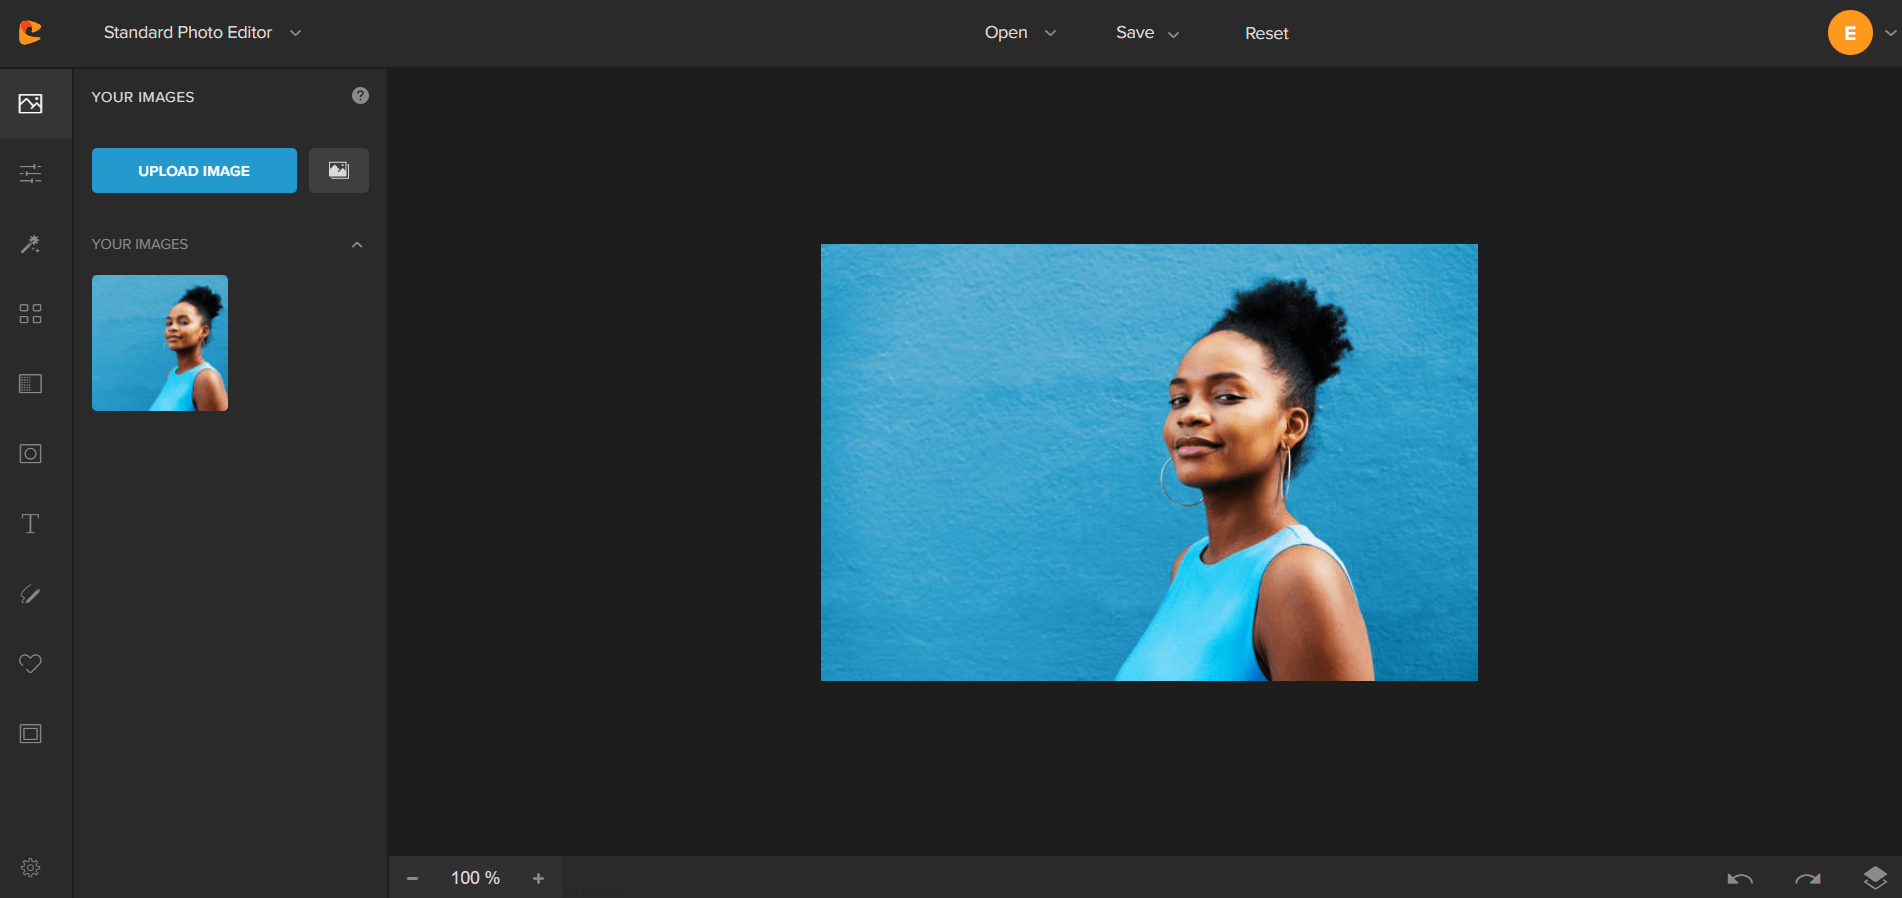 Colorcinch website. Image loaded ready to edit of a woman against a blue background.